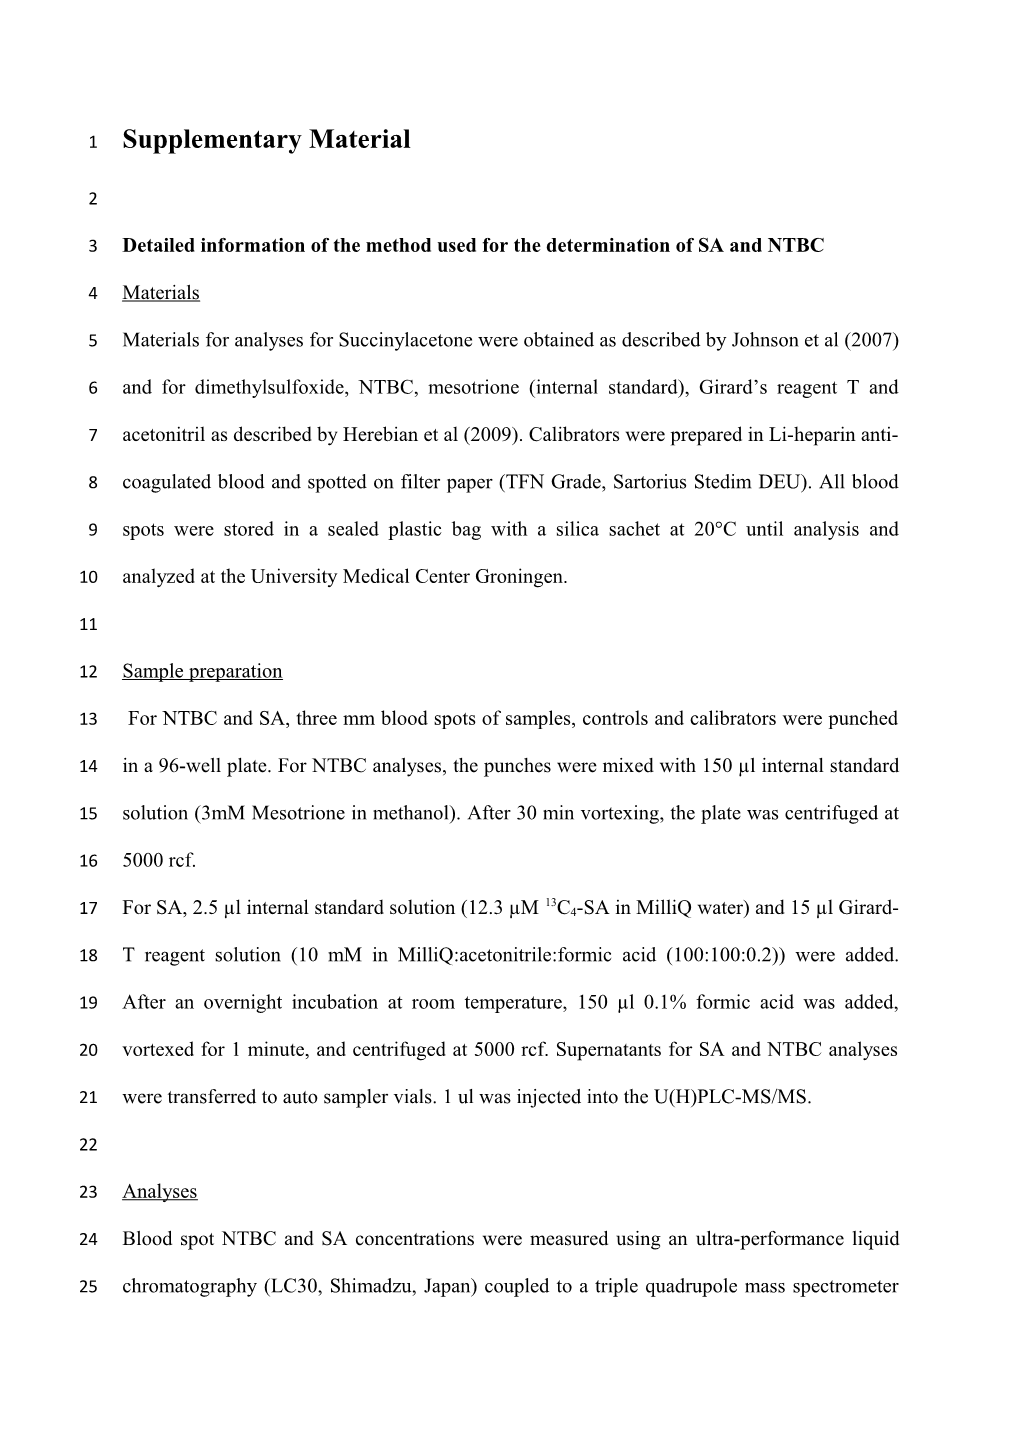 Detailed Information of the Method Used for the Determination of SA and NTBC